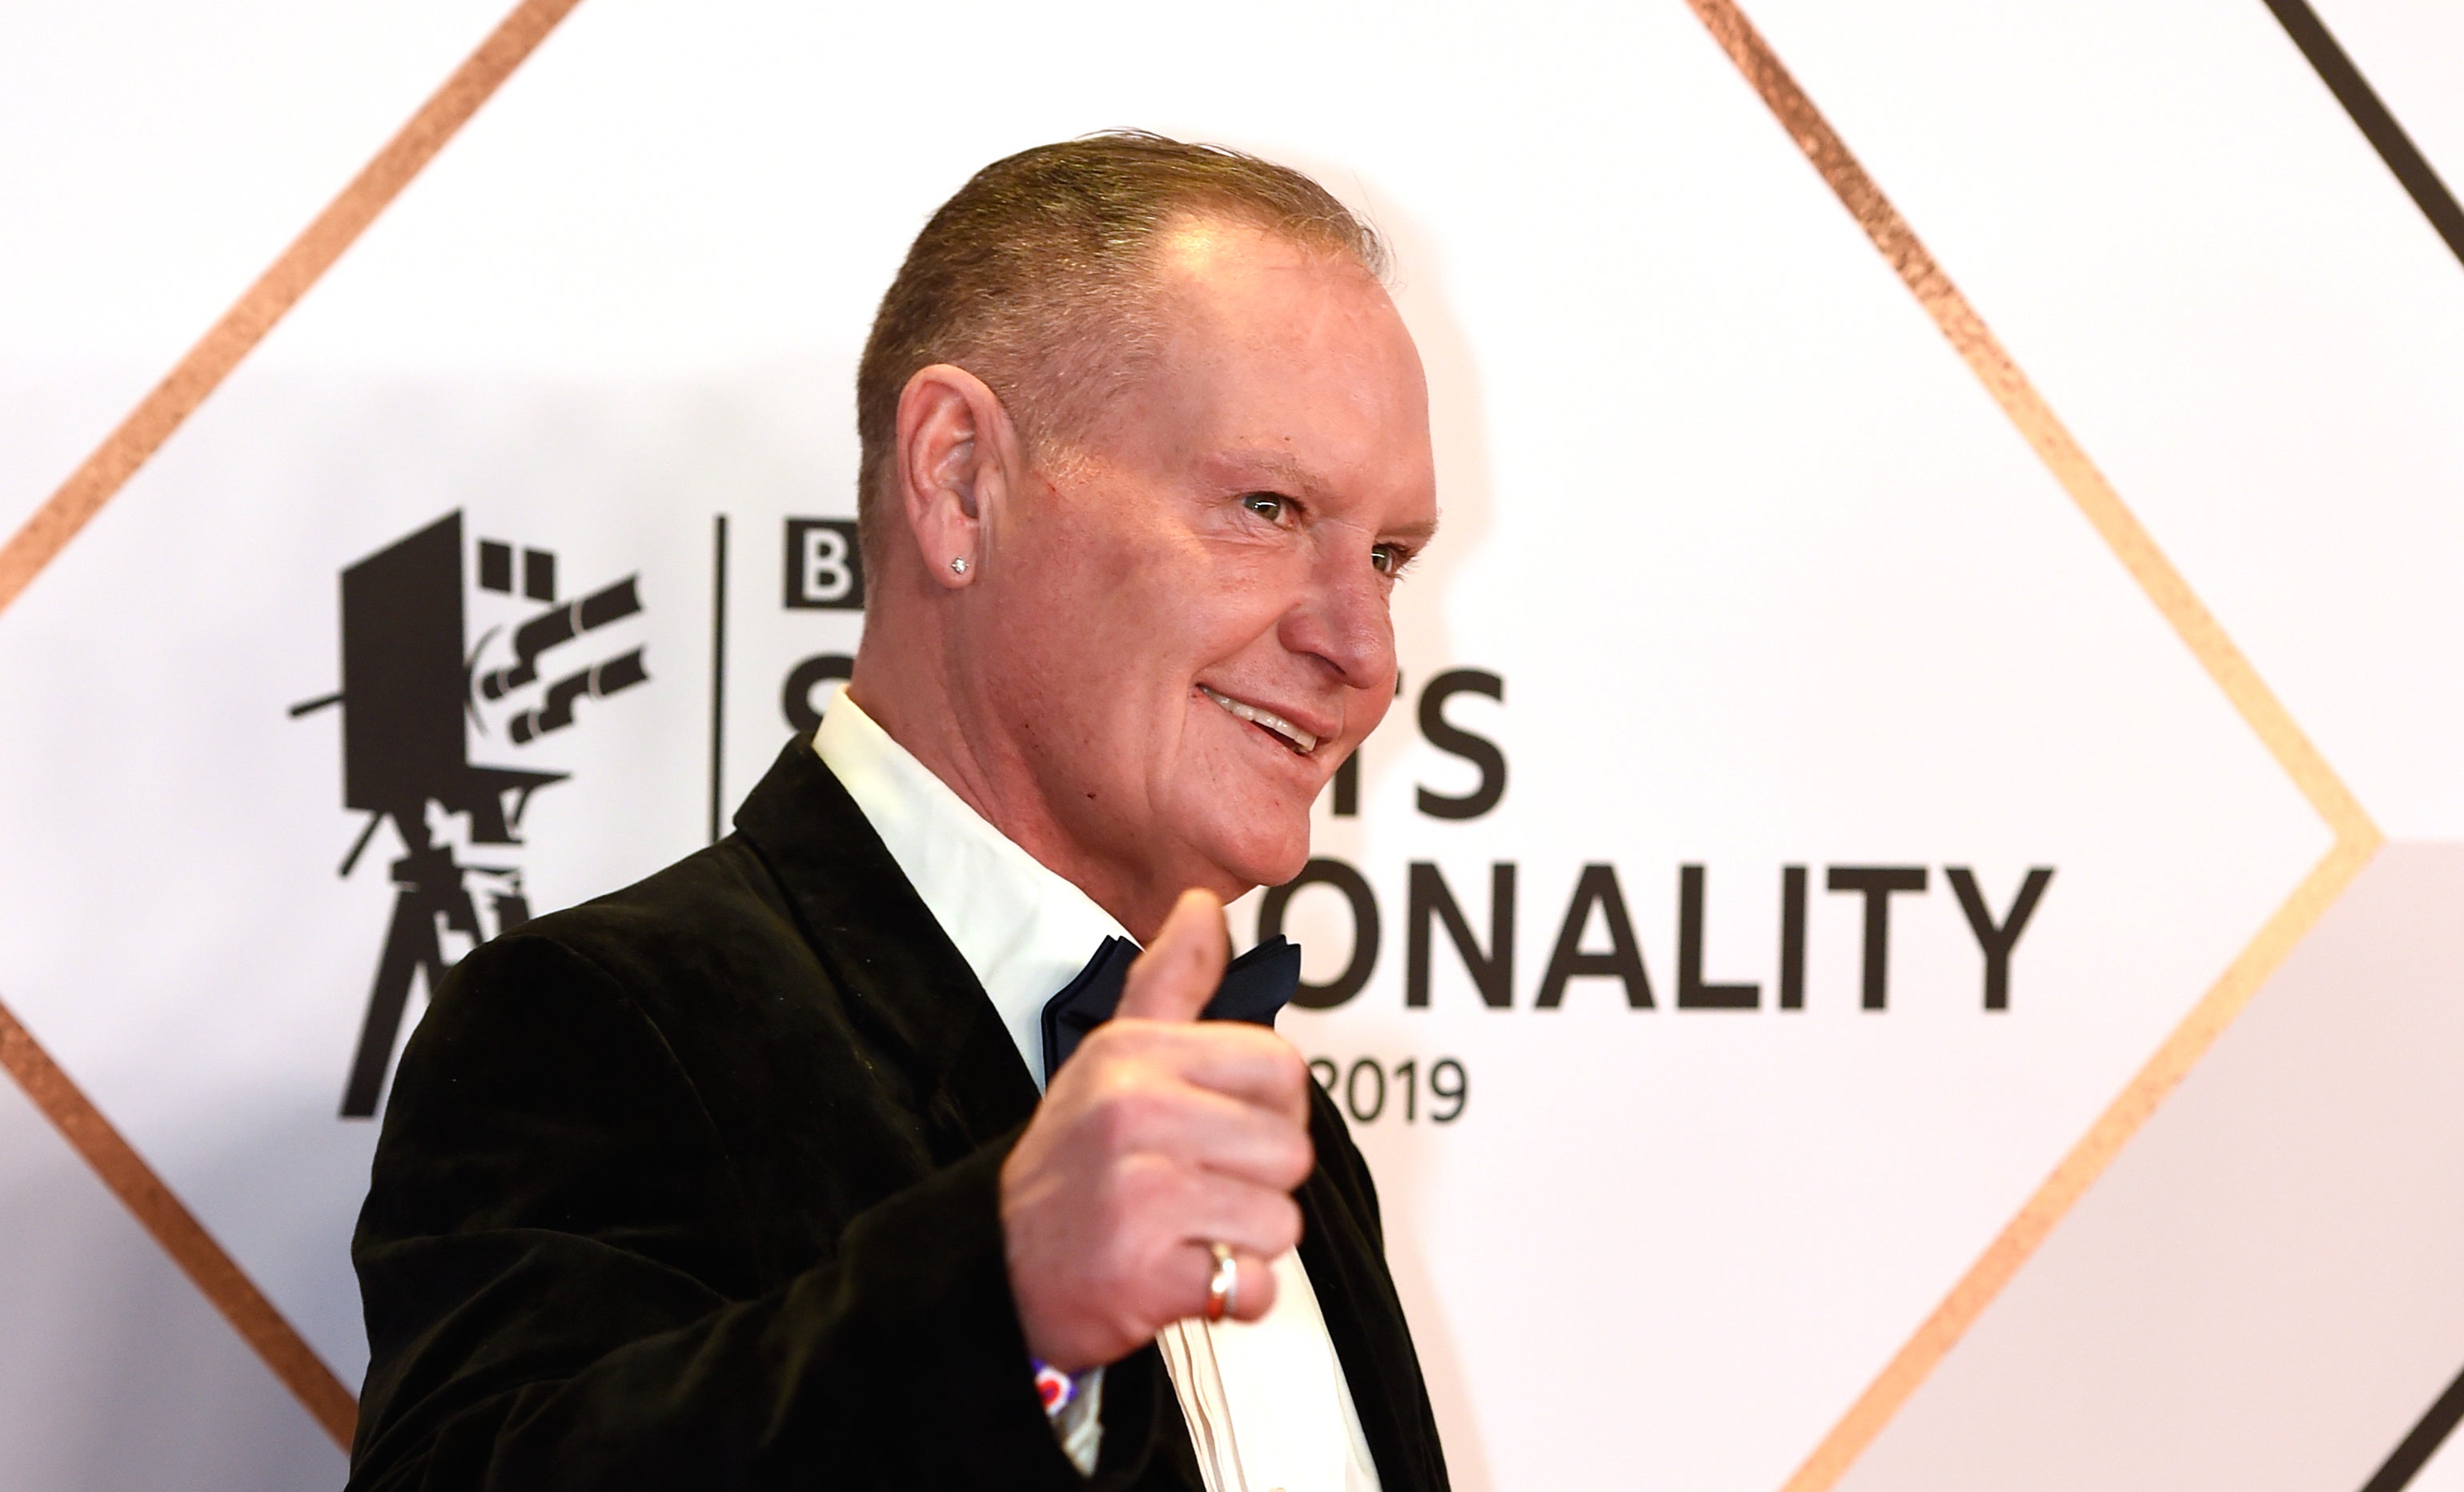 Paul Gascoigne said stories in The Sun had ‘a devastating and debilitating impact on my mental health and wellbeing’ (PA)